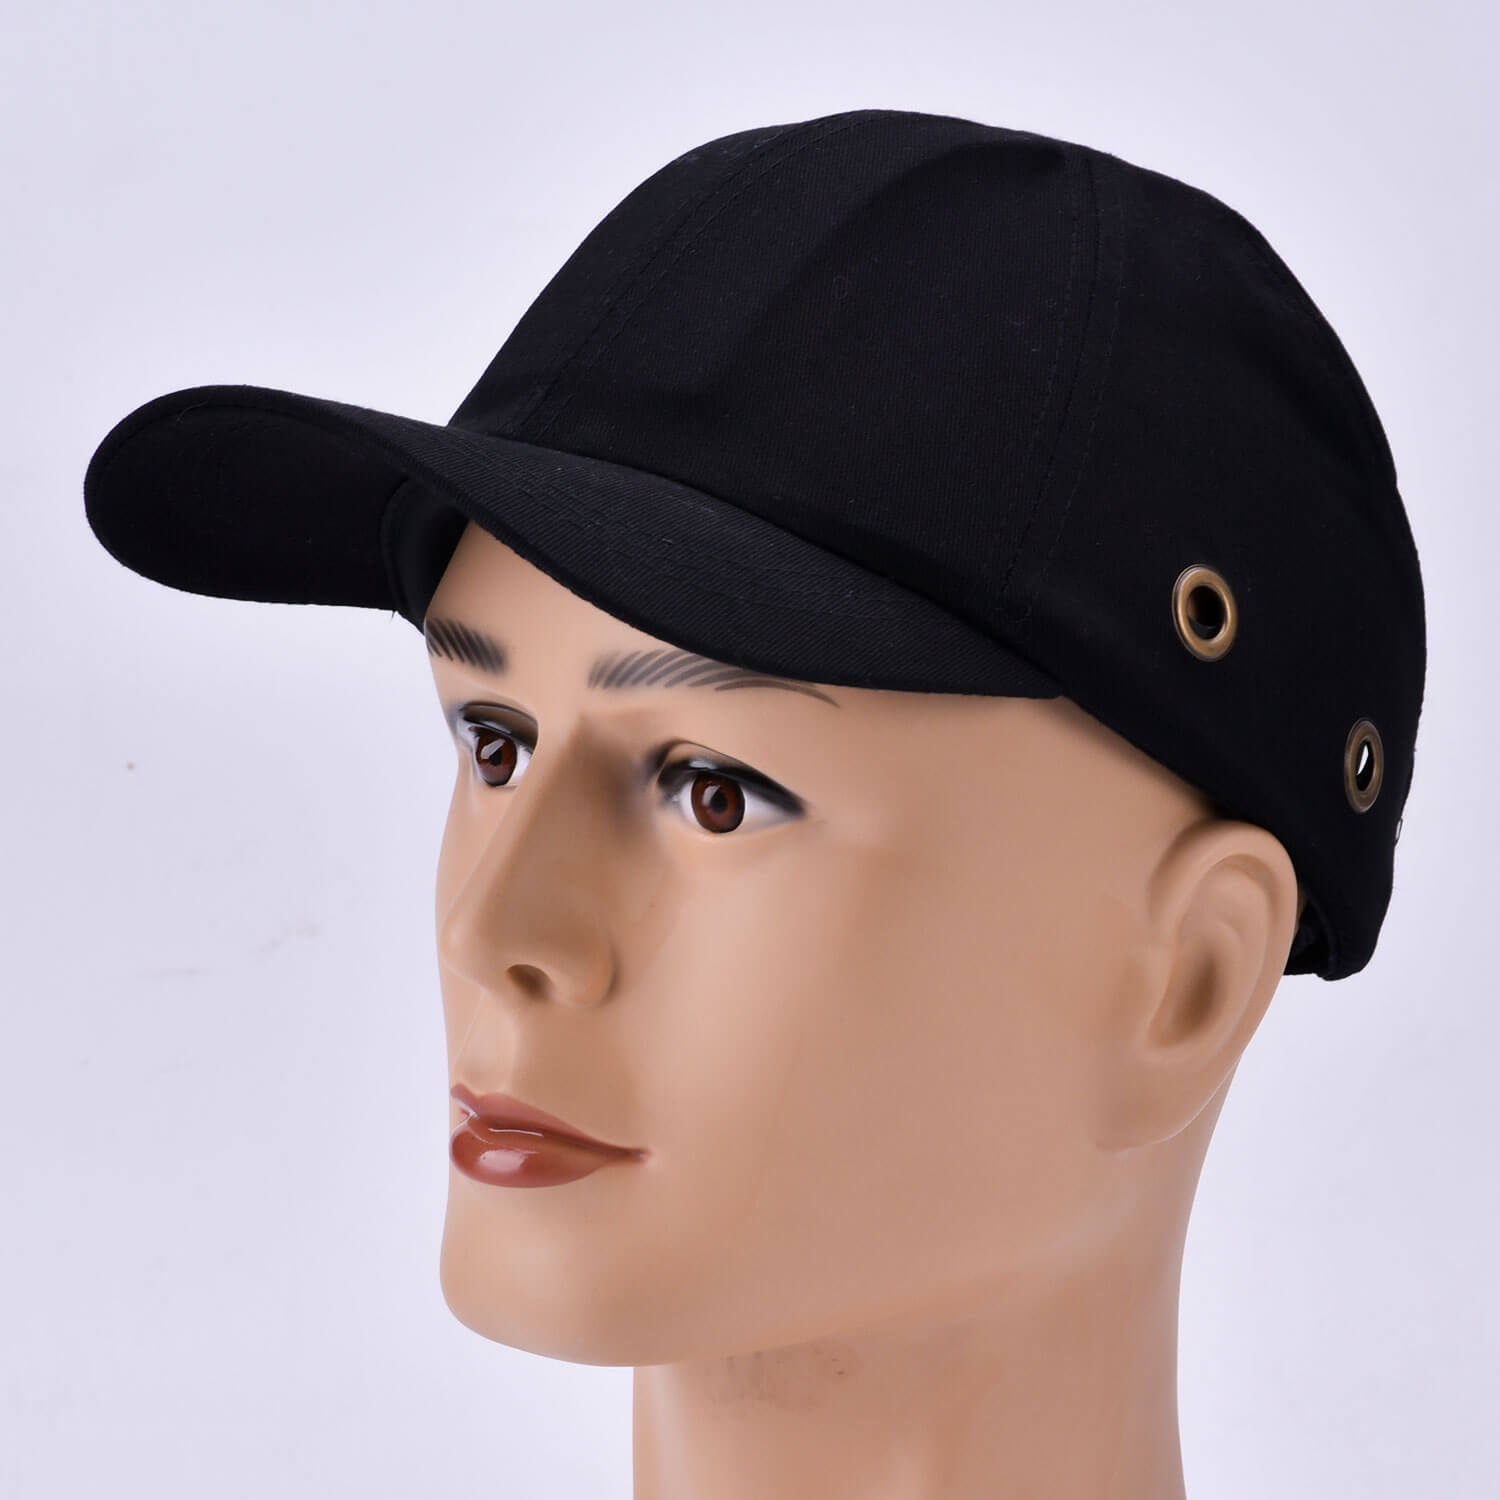 Experienced supplier of Safety Bump Cap W-001 Black